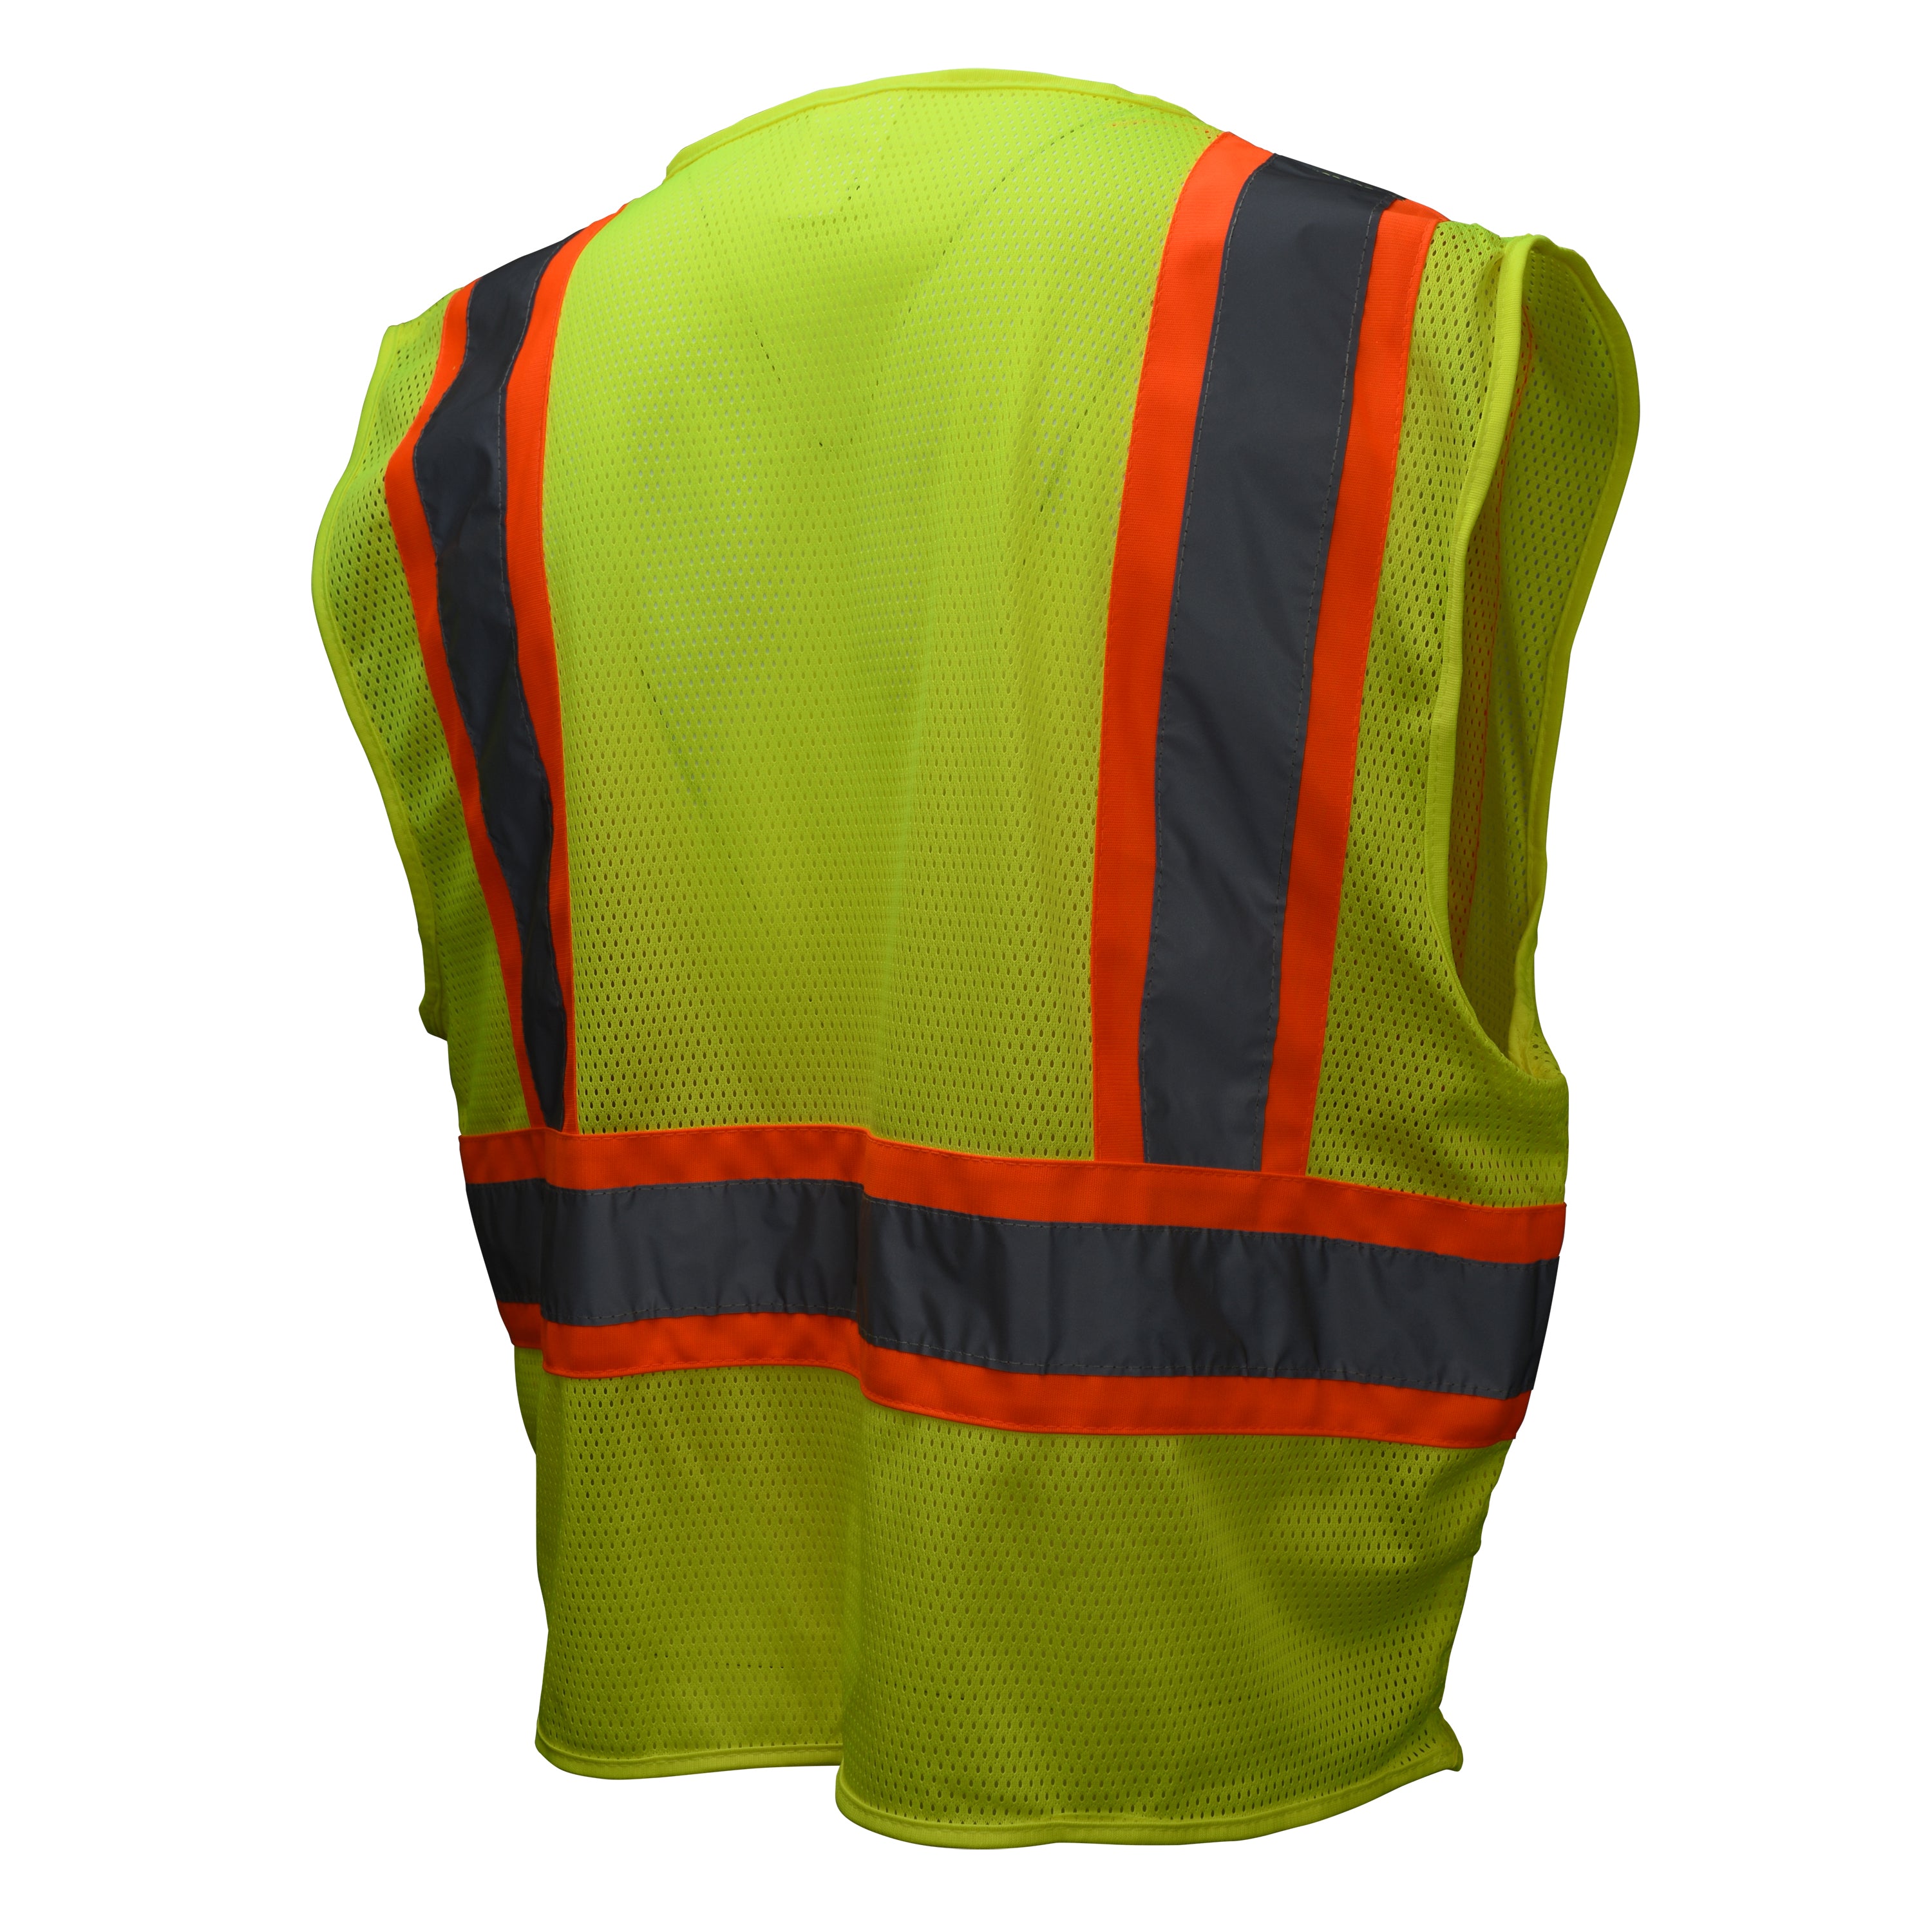 Class 2 Mesh Economy Safety Vest w/2" Tape and Two-Tone Reflective Trim